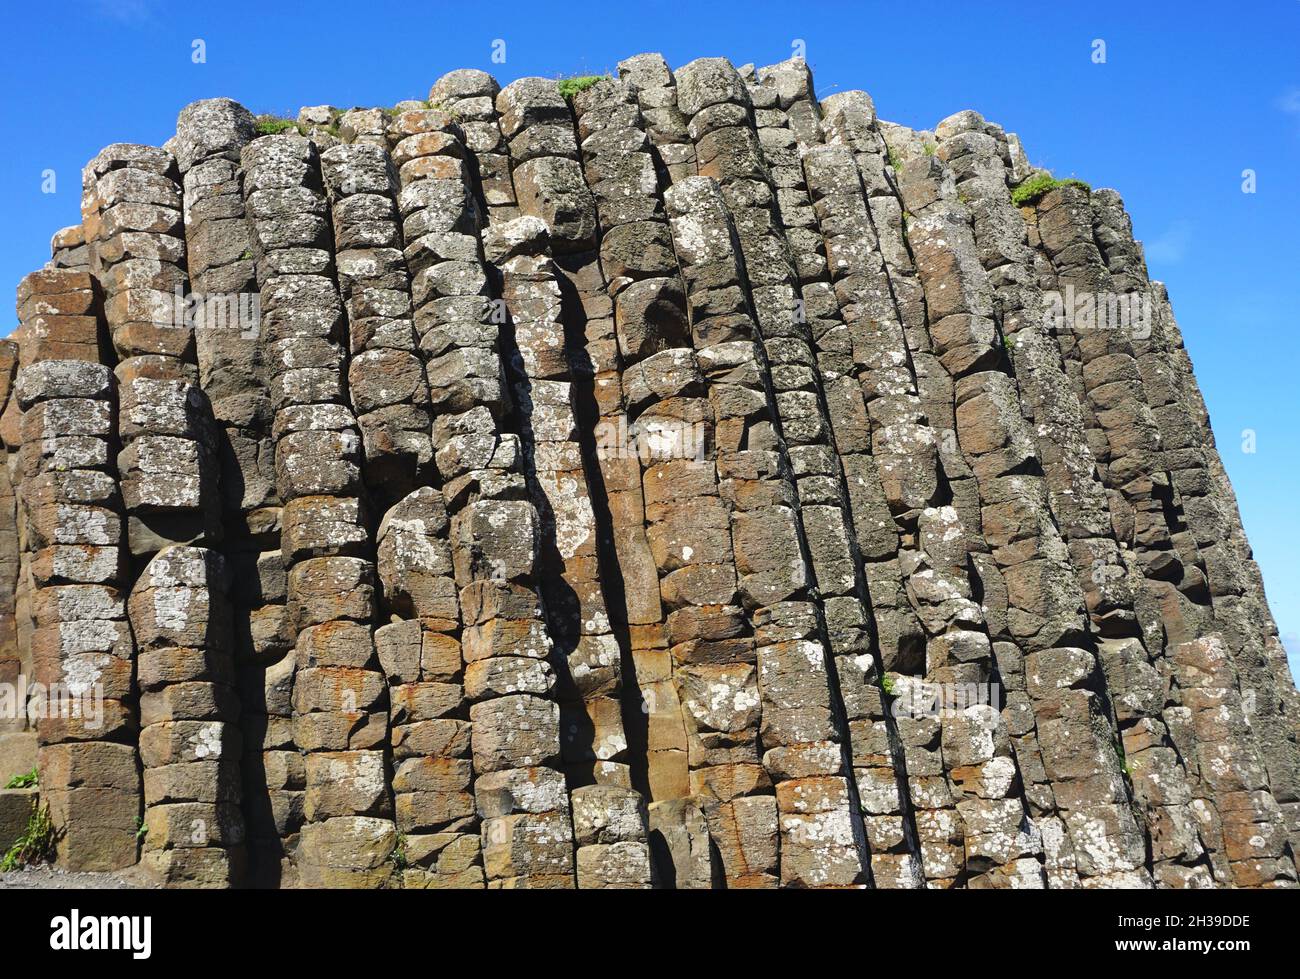 Basalt pillars rock formation formed by volcanic eruption 50 million years ago at The Giant's Causeway, located on the north coast of Northern Ireland Stock Photo